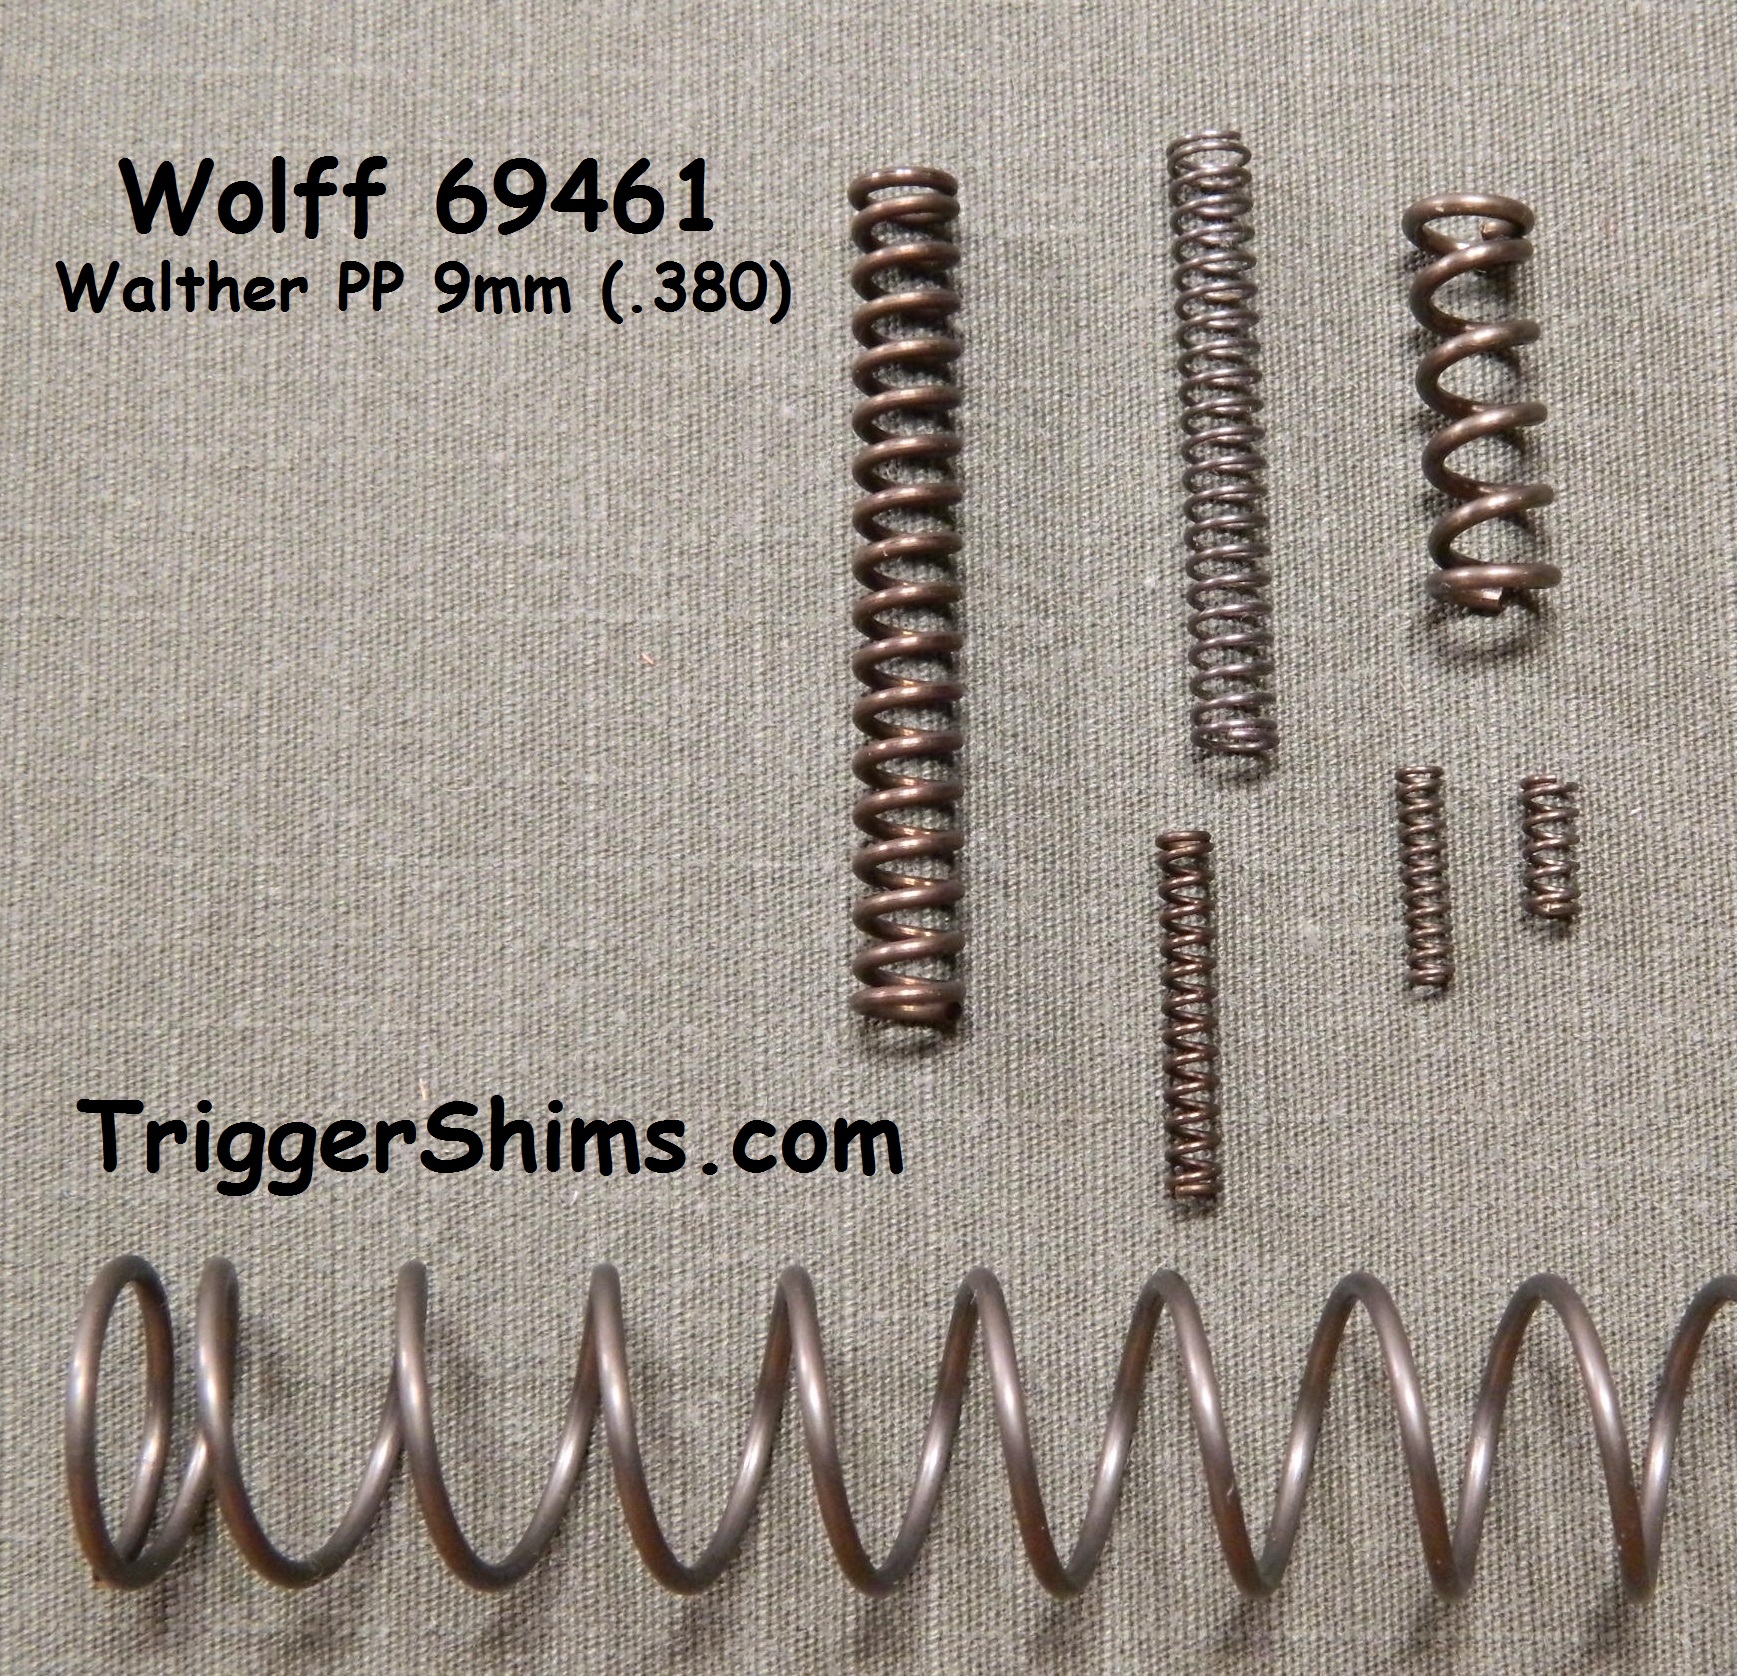 Wolff 69461 Walther PP Service Pak